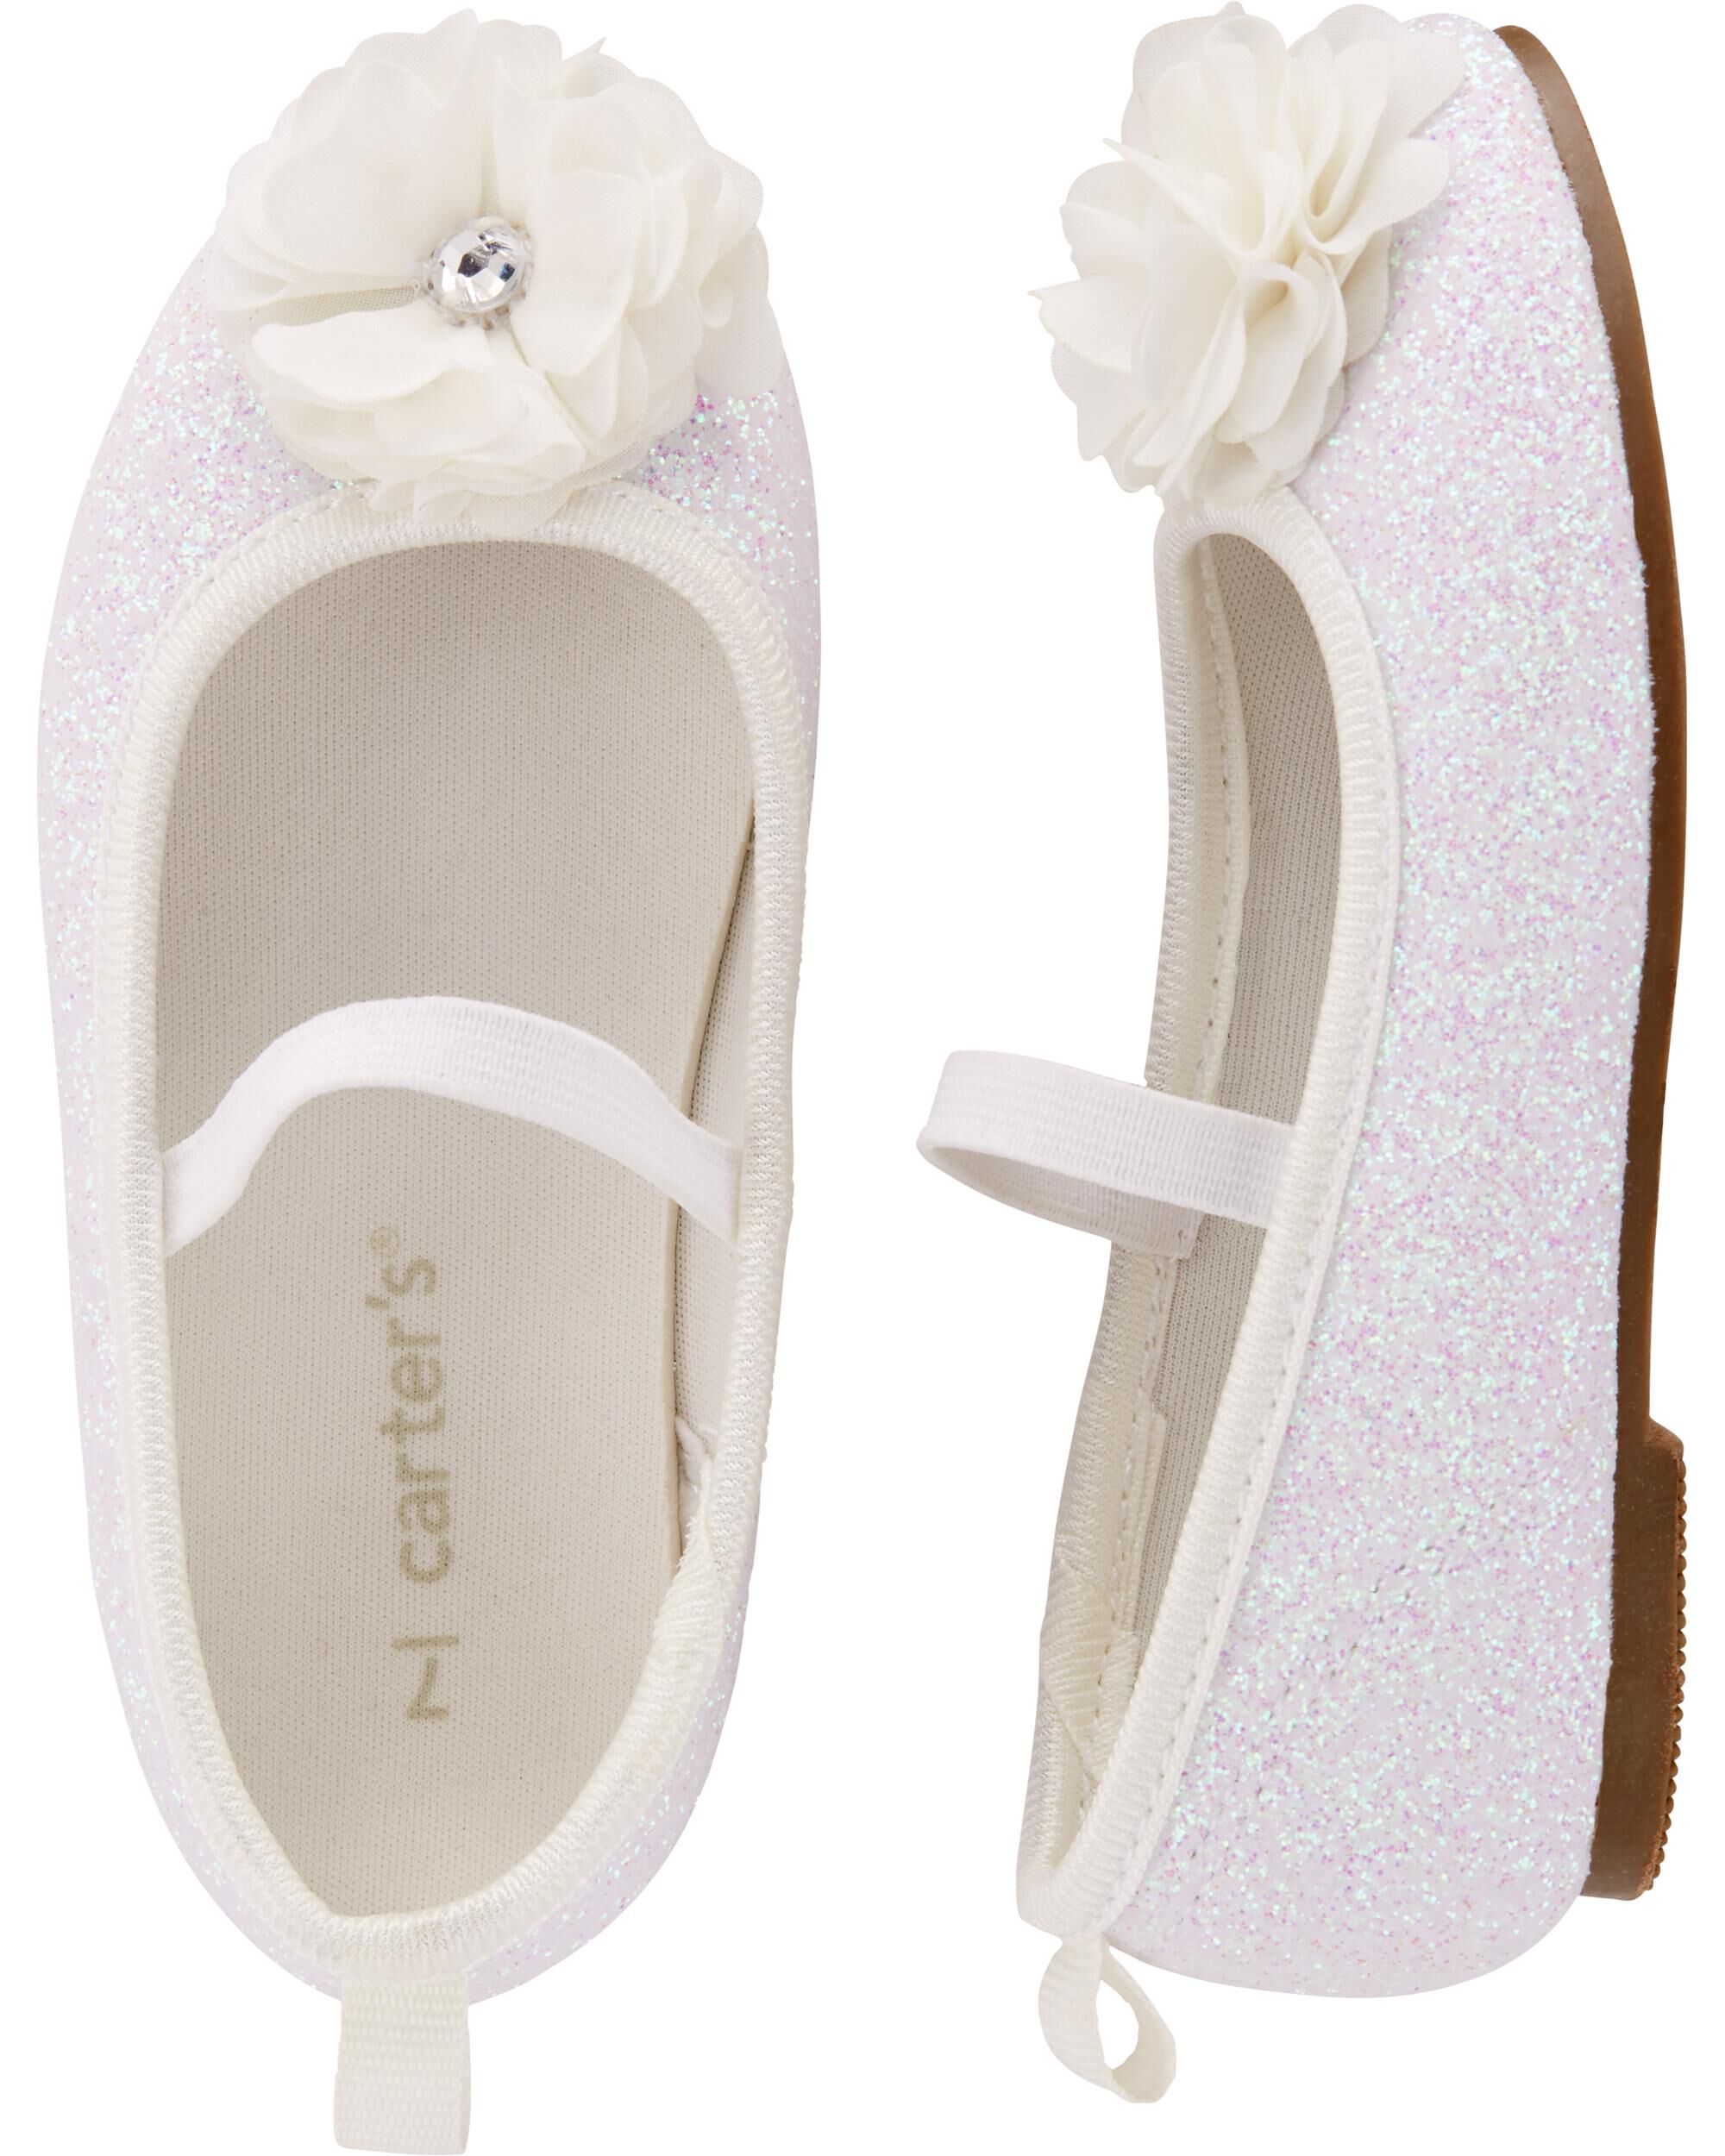 New Oshkosh Sparkle Multiple Colors Flats shoes girls toddler and kid 7,12